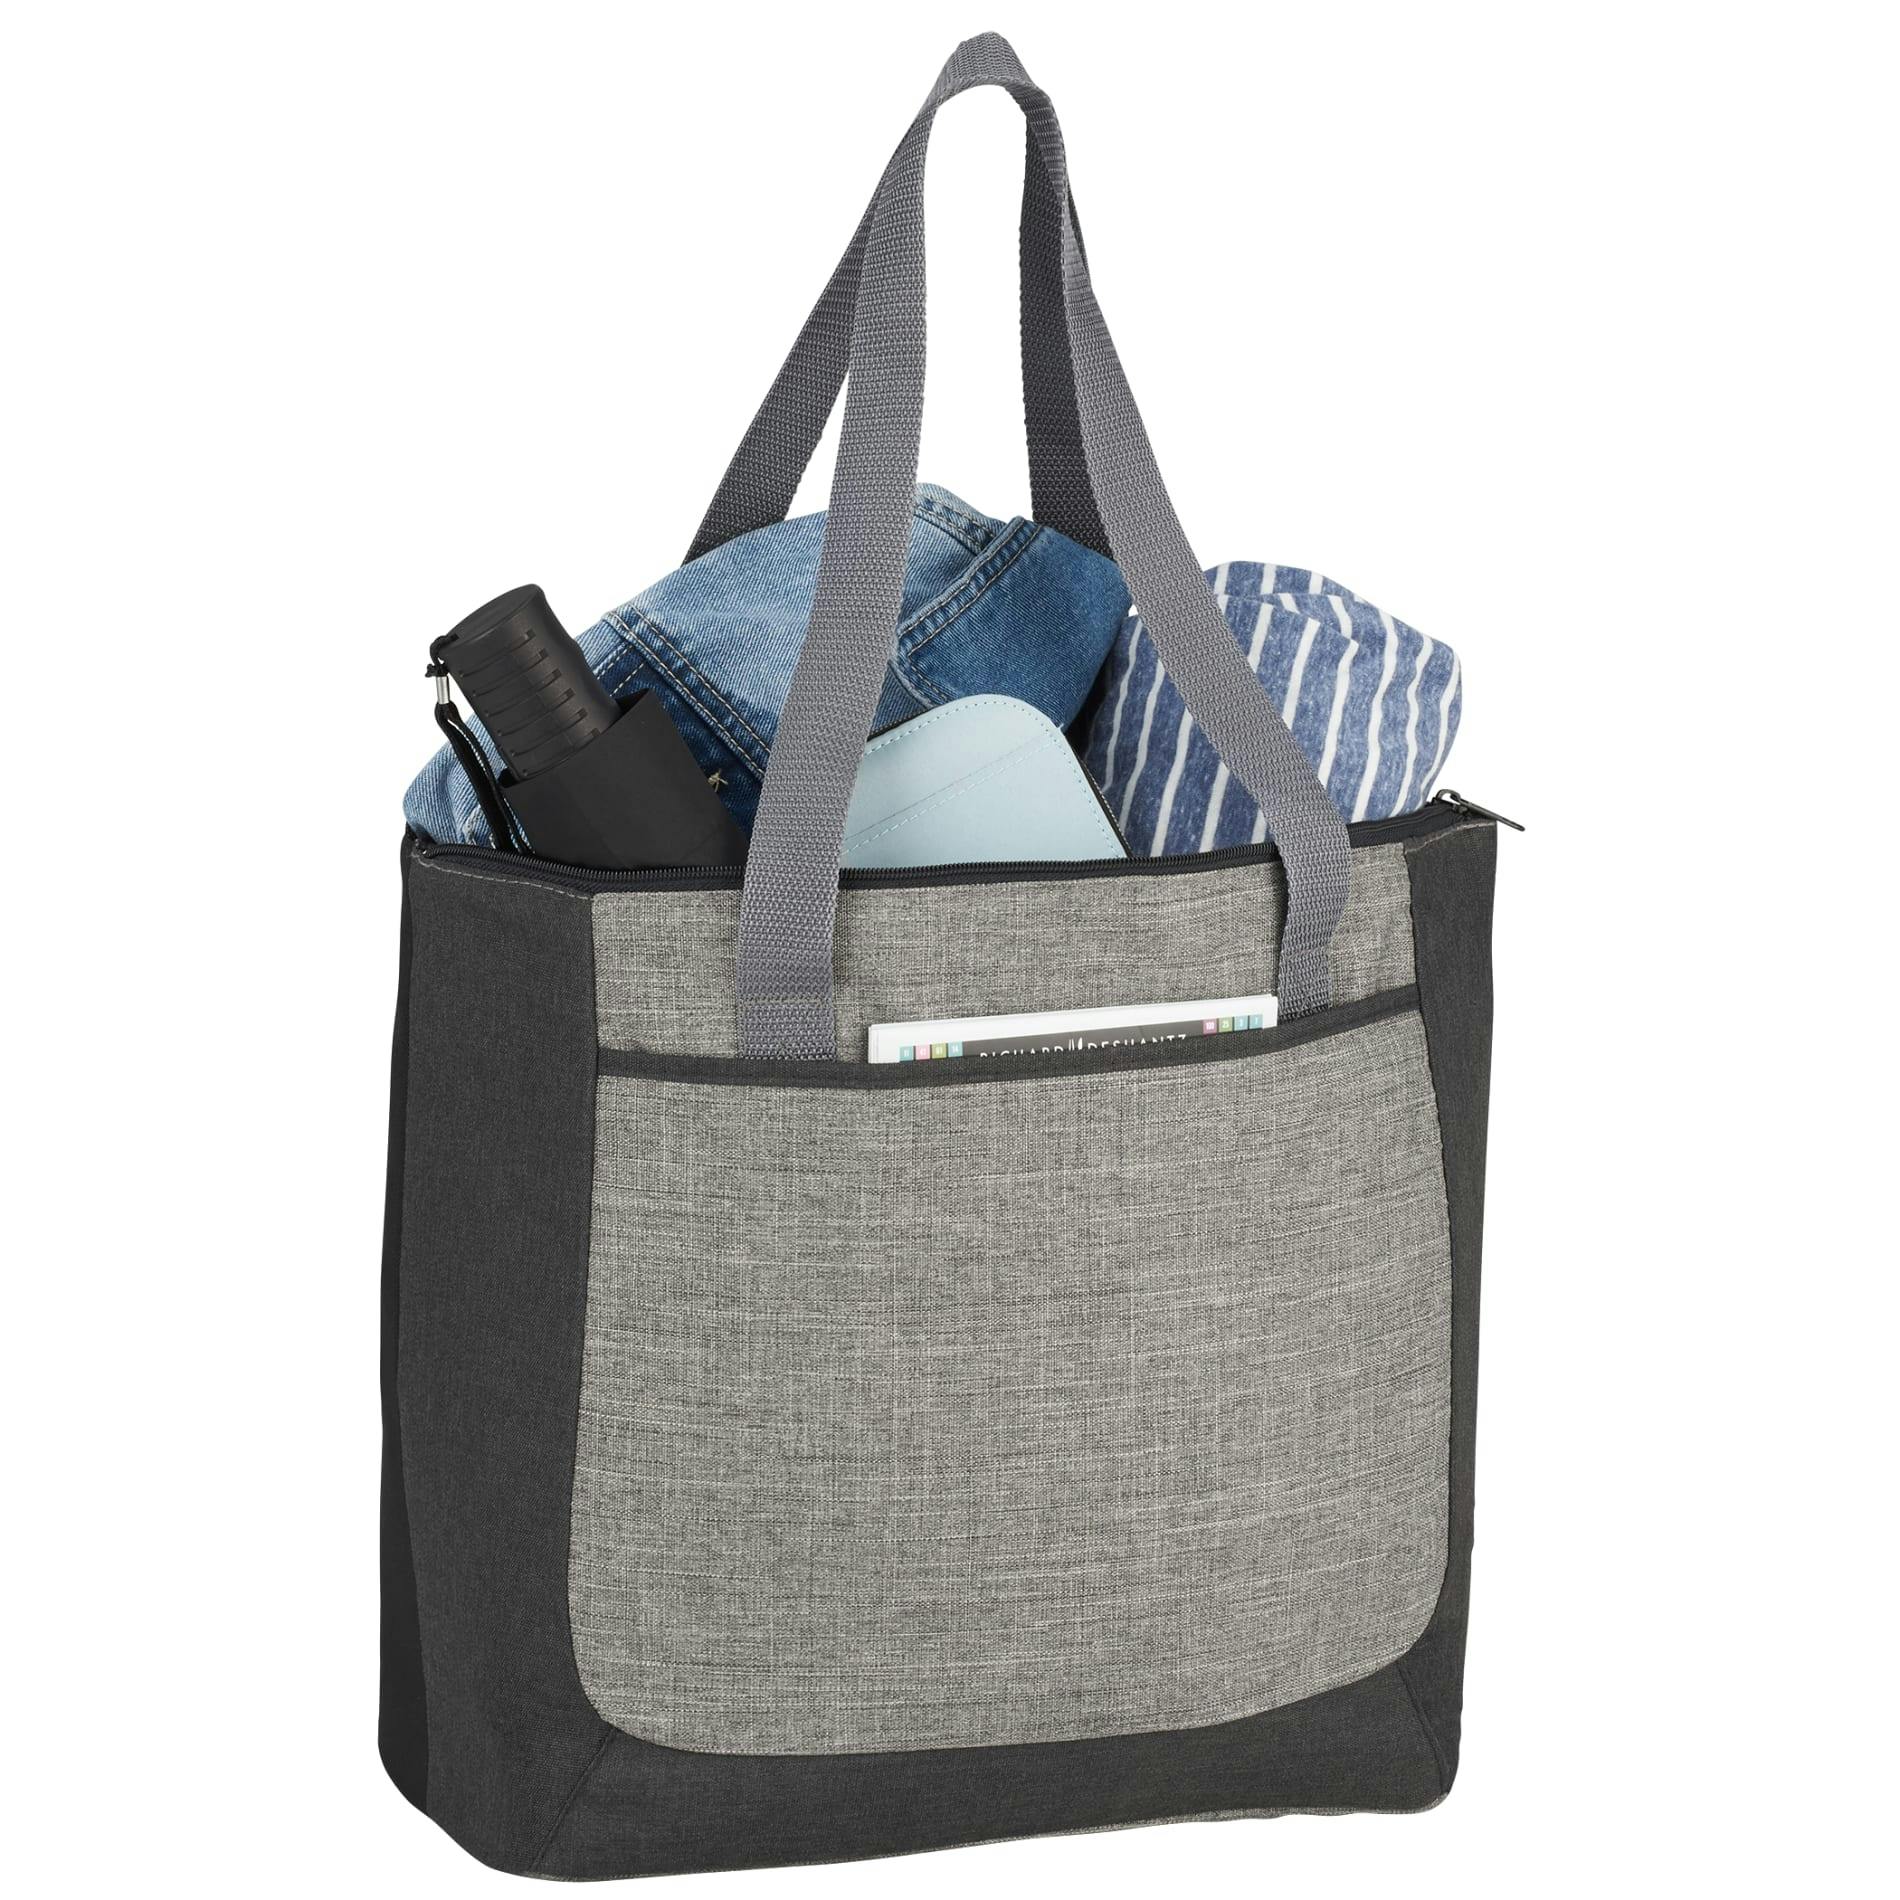 Reclaim Recycled Zippered Tote - additional Image 4